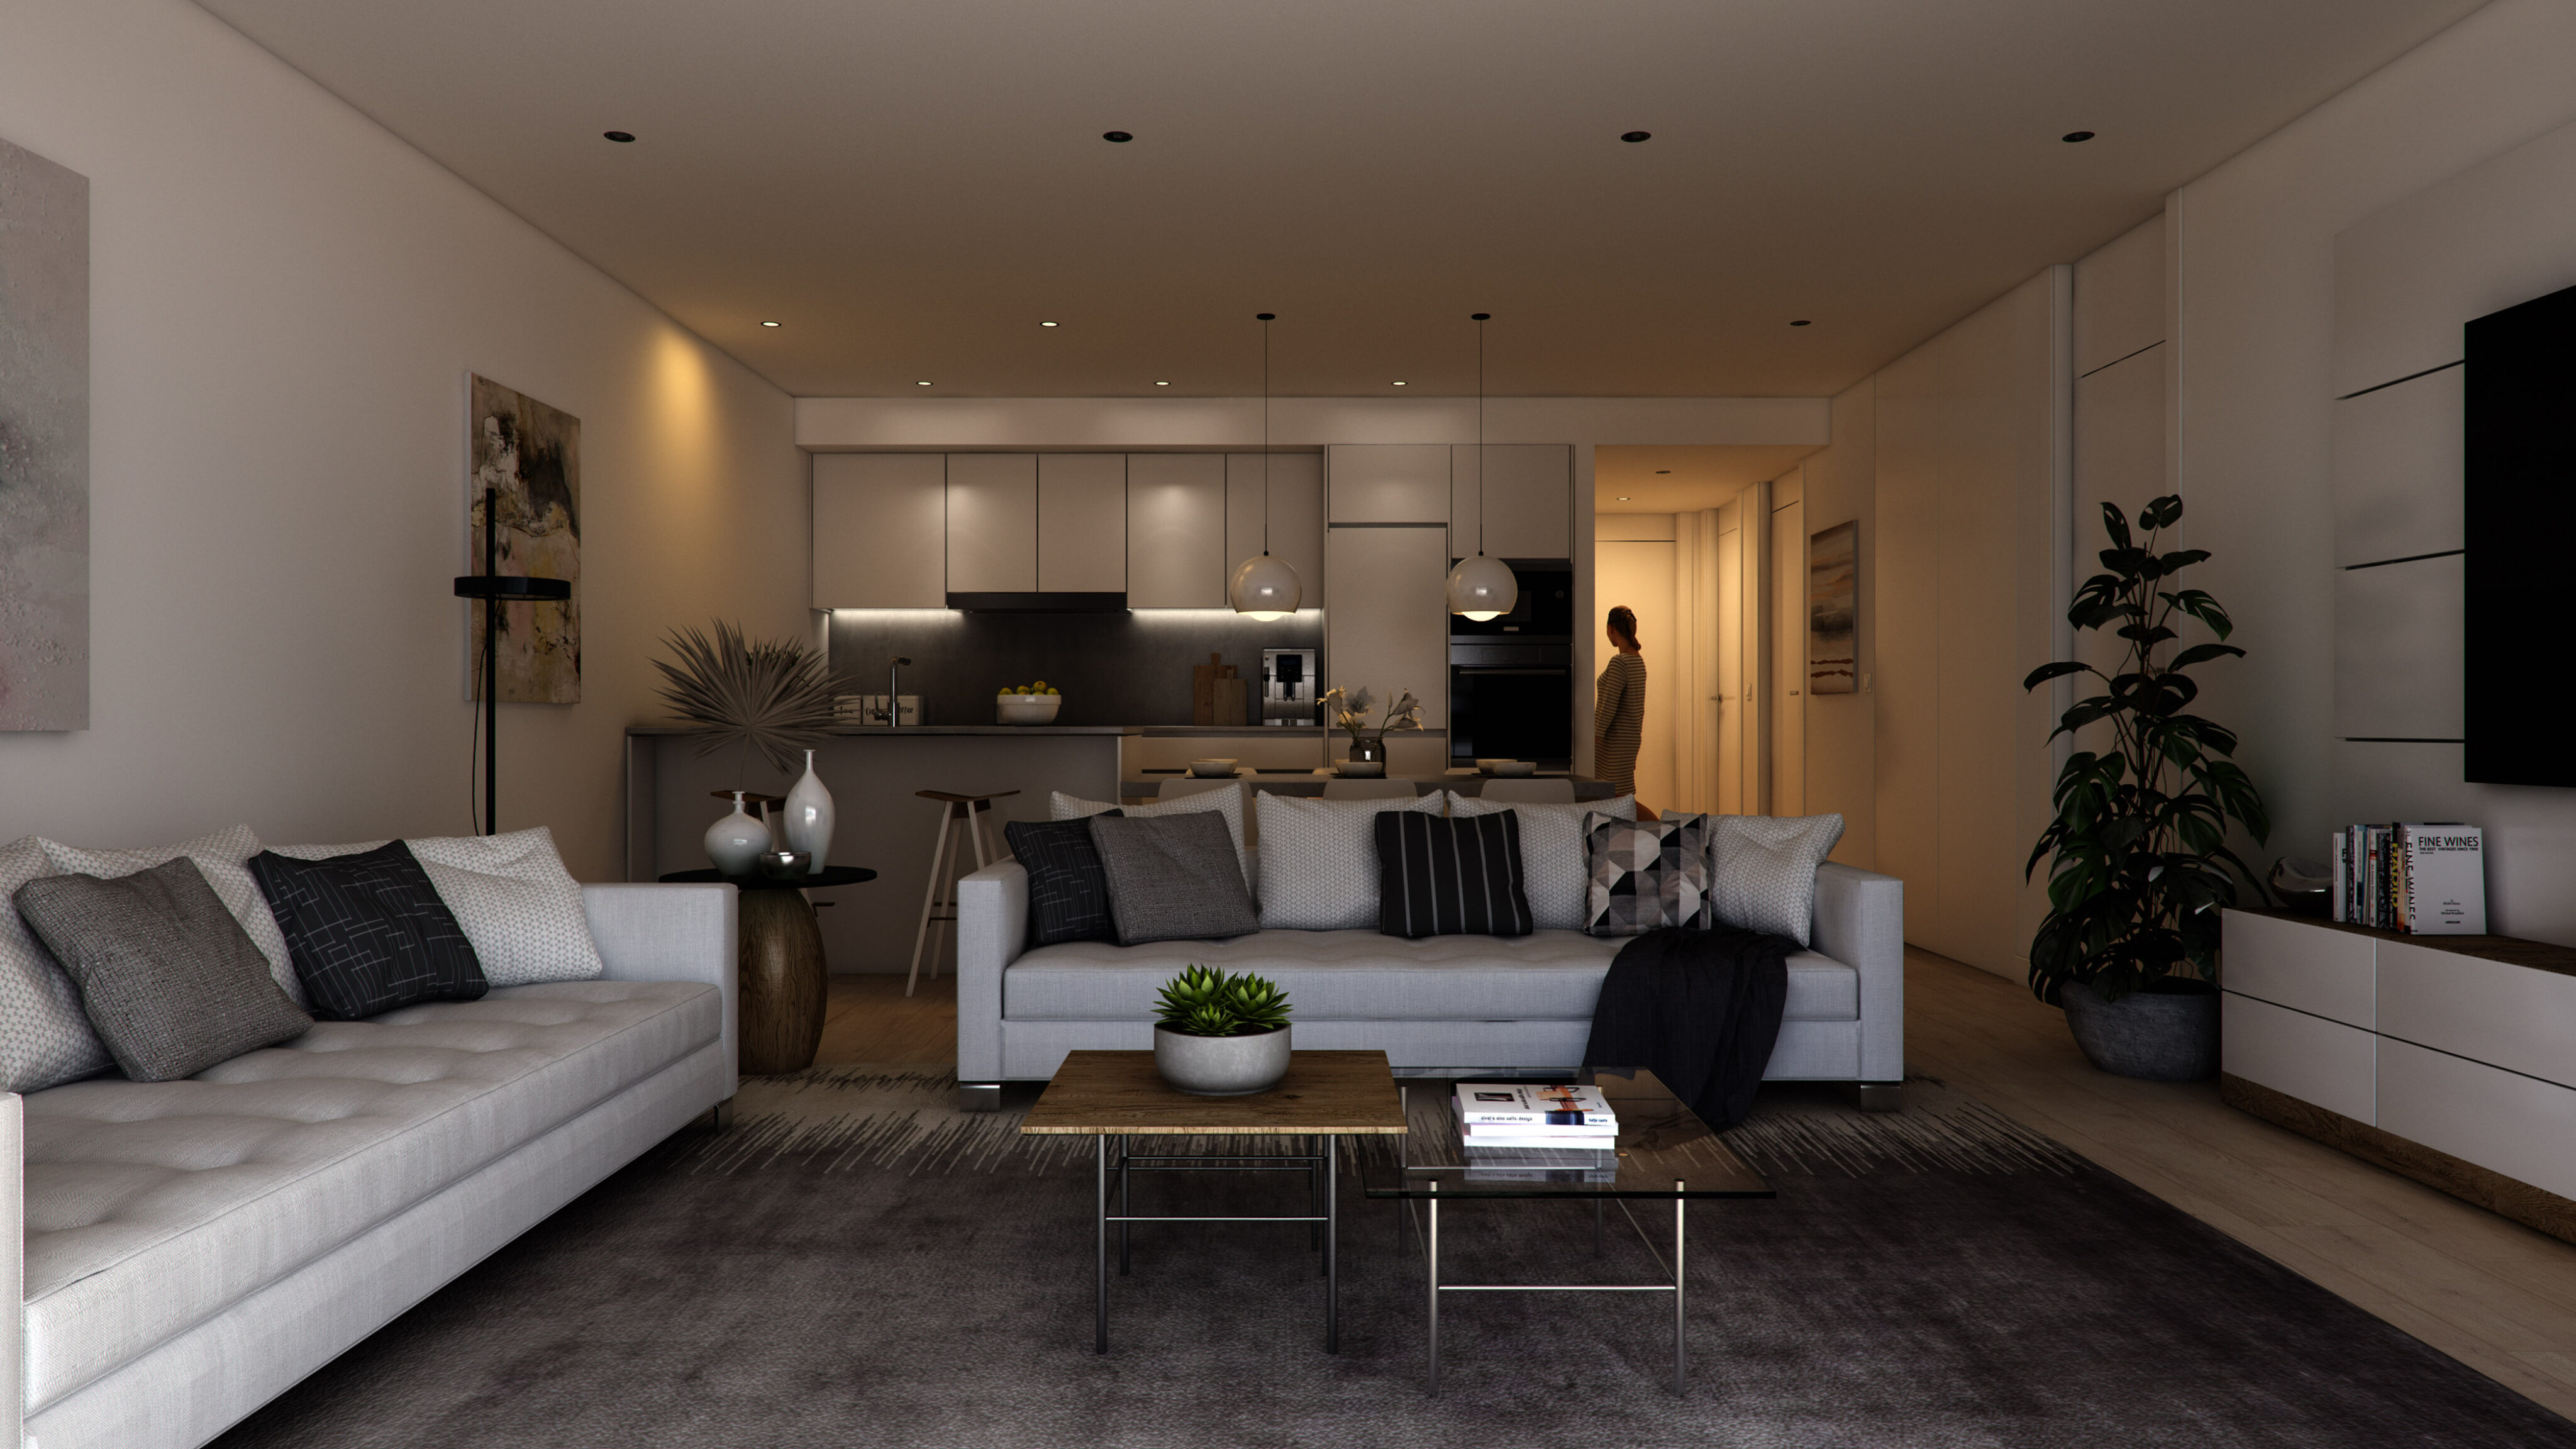 Interior render of the living + kitchen